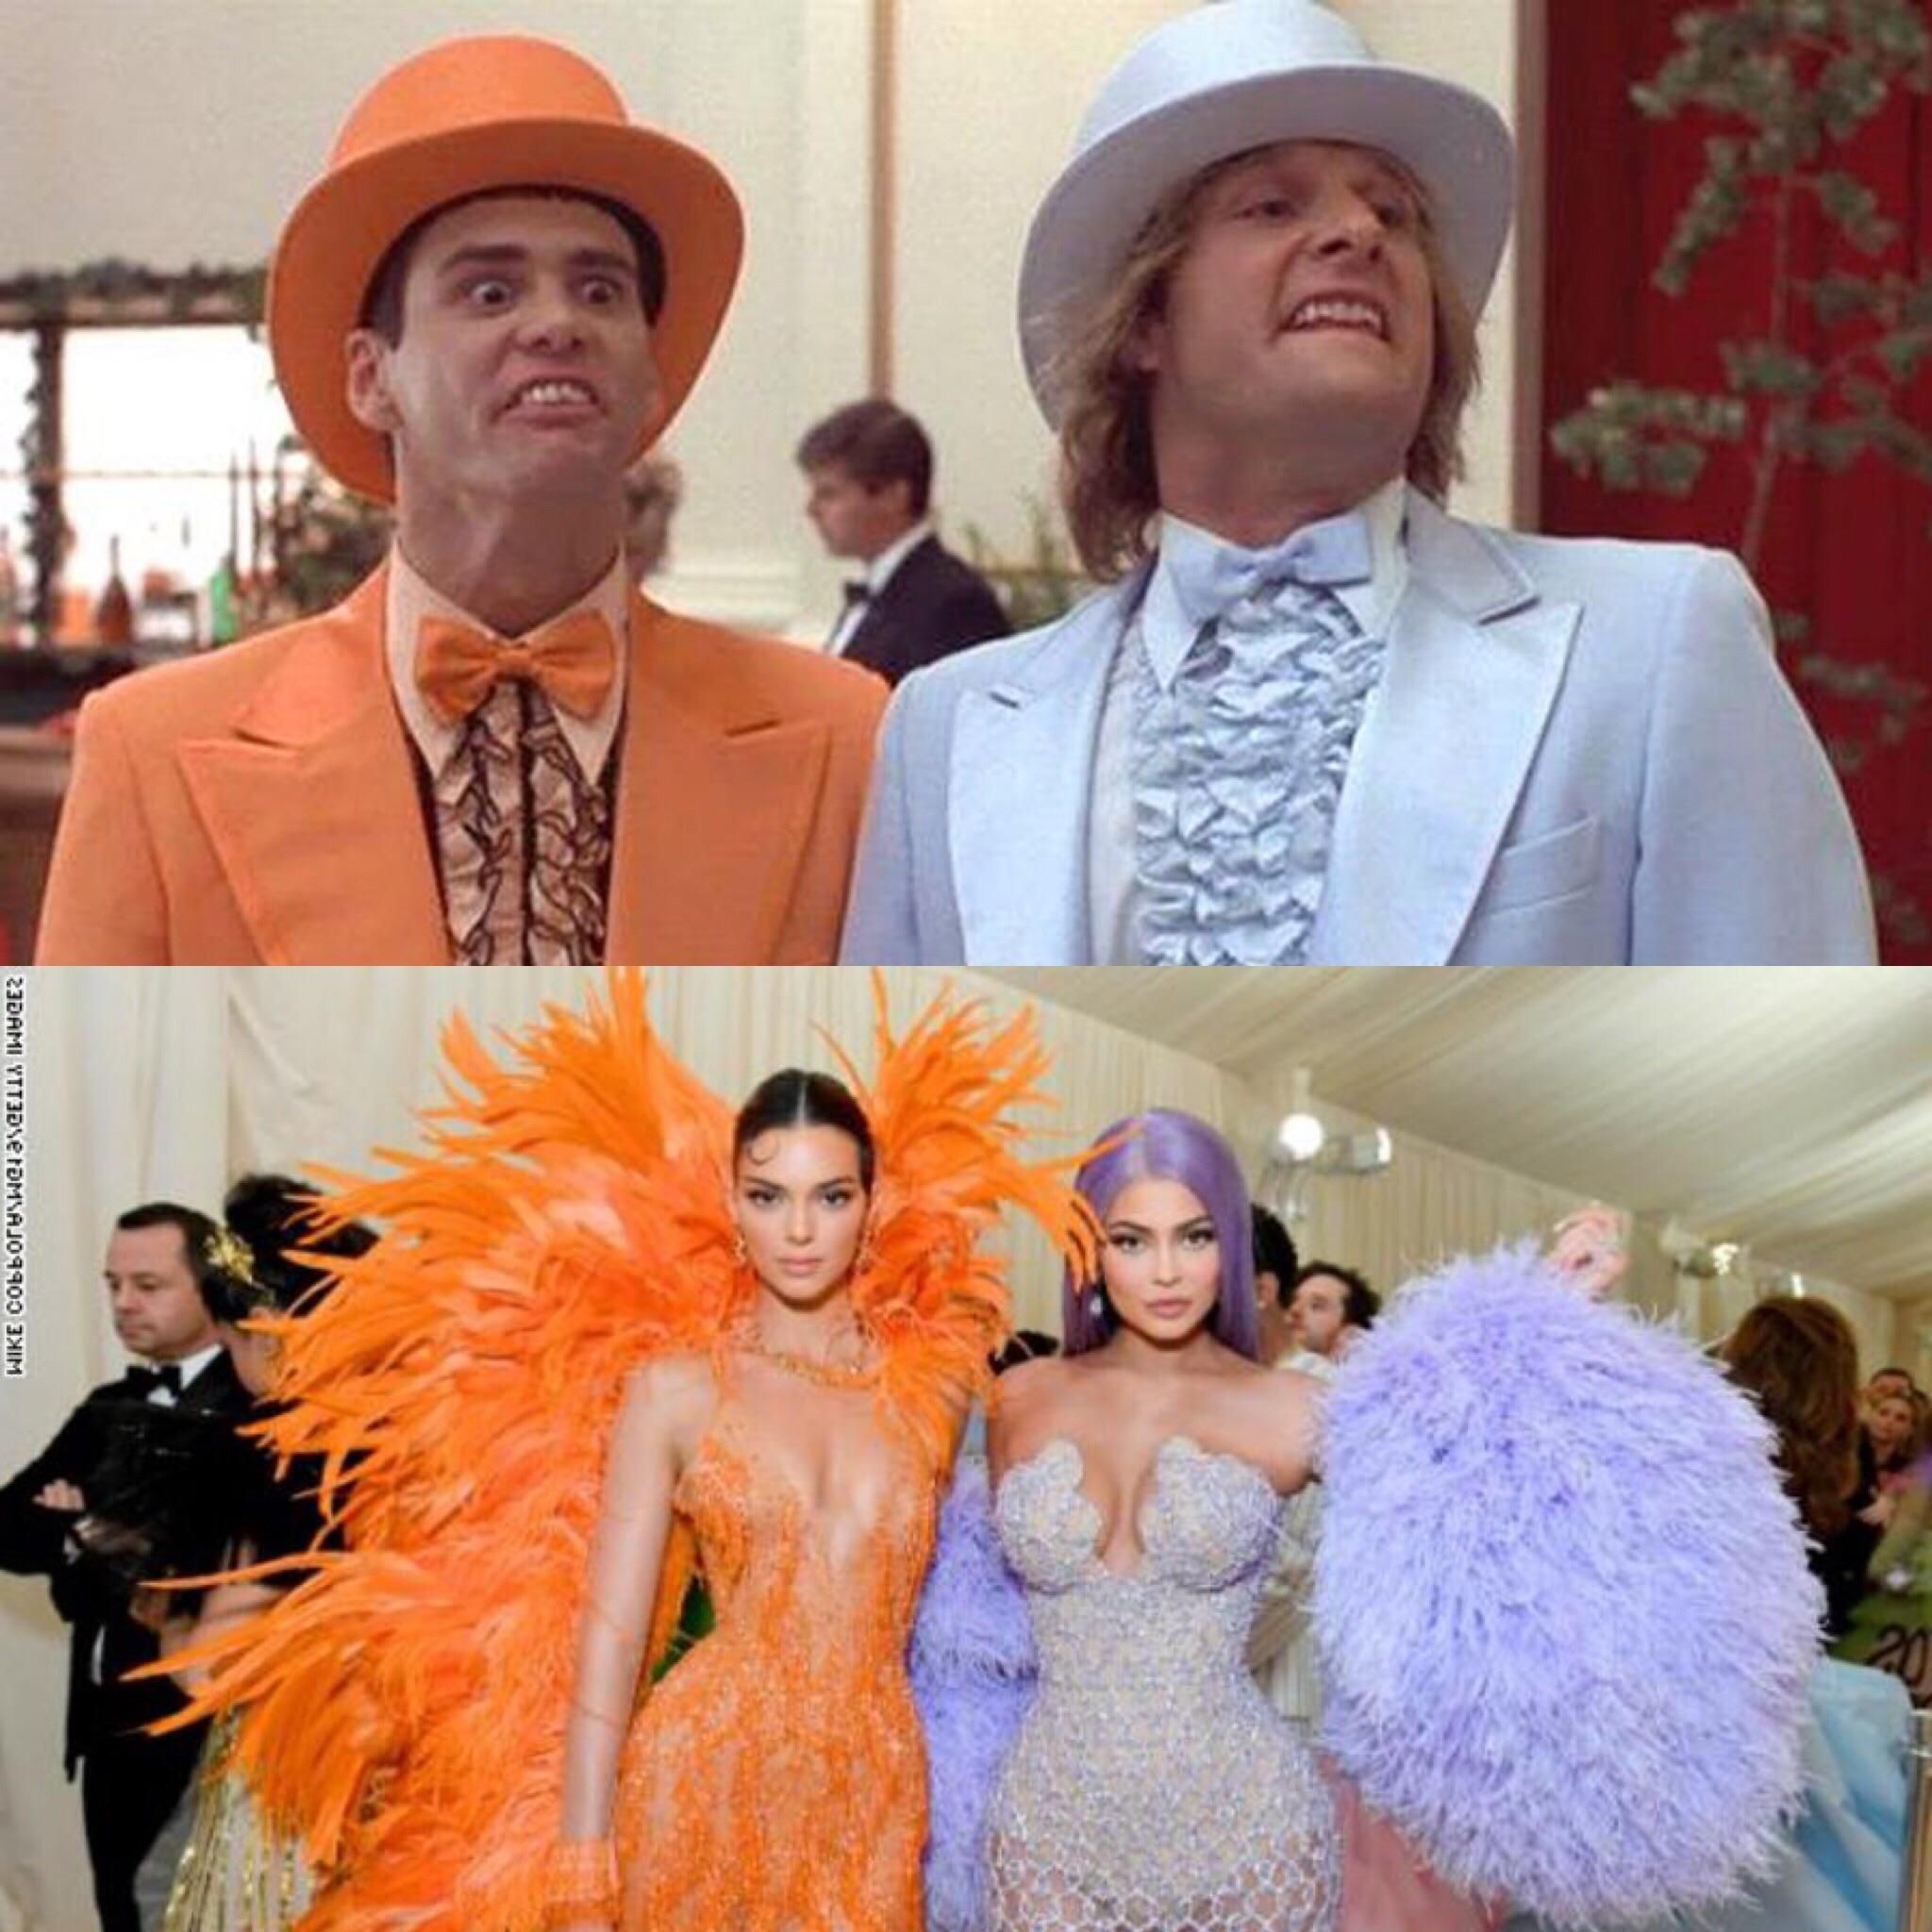 Nailed it! 2019 Dumb and Dumber